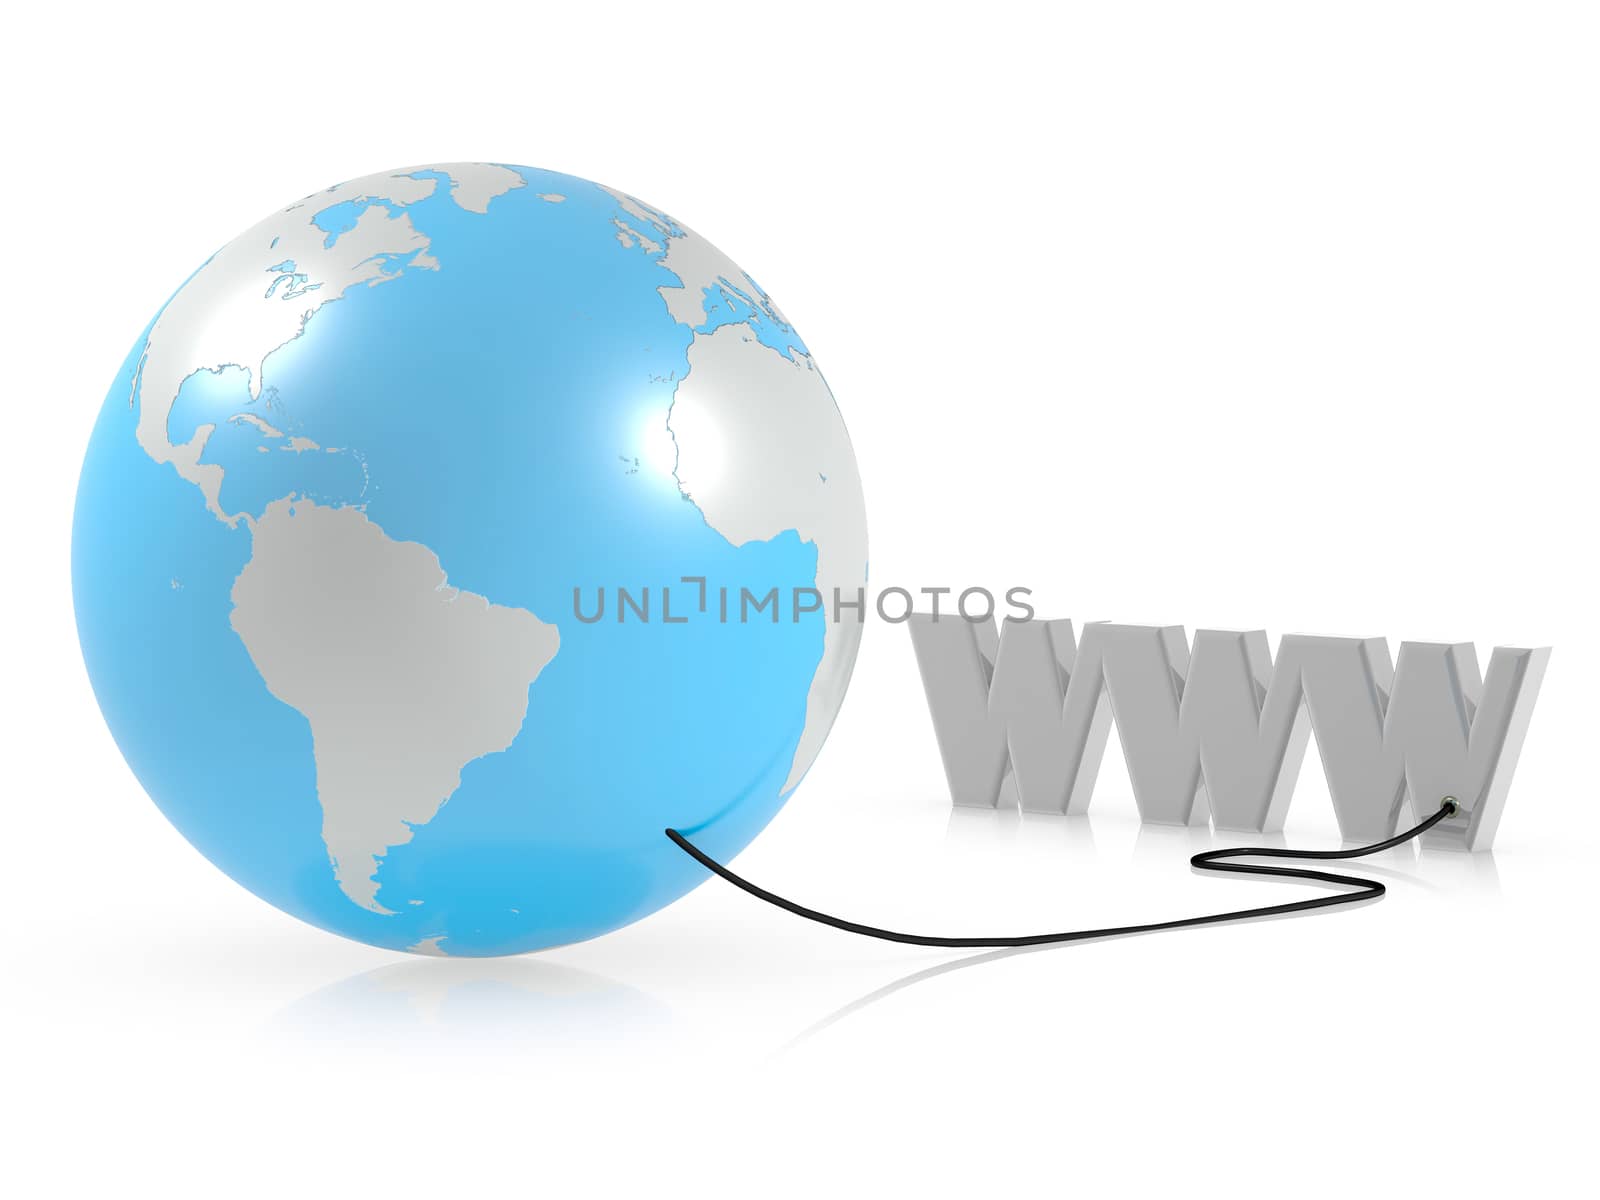 World wide web by hyrons